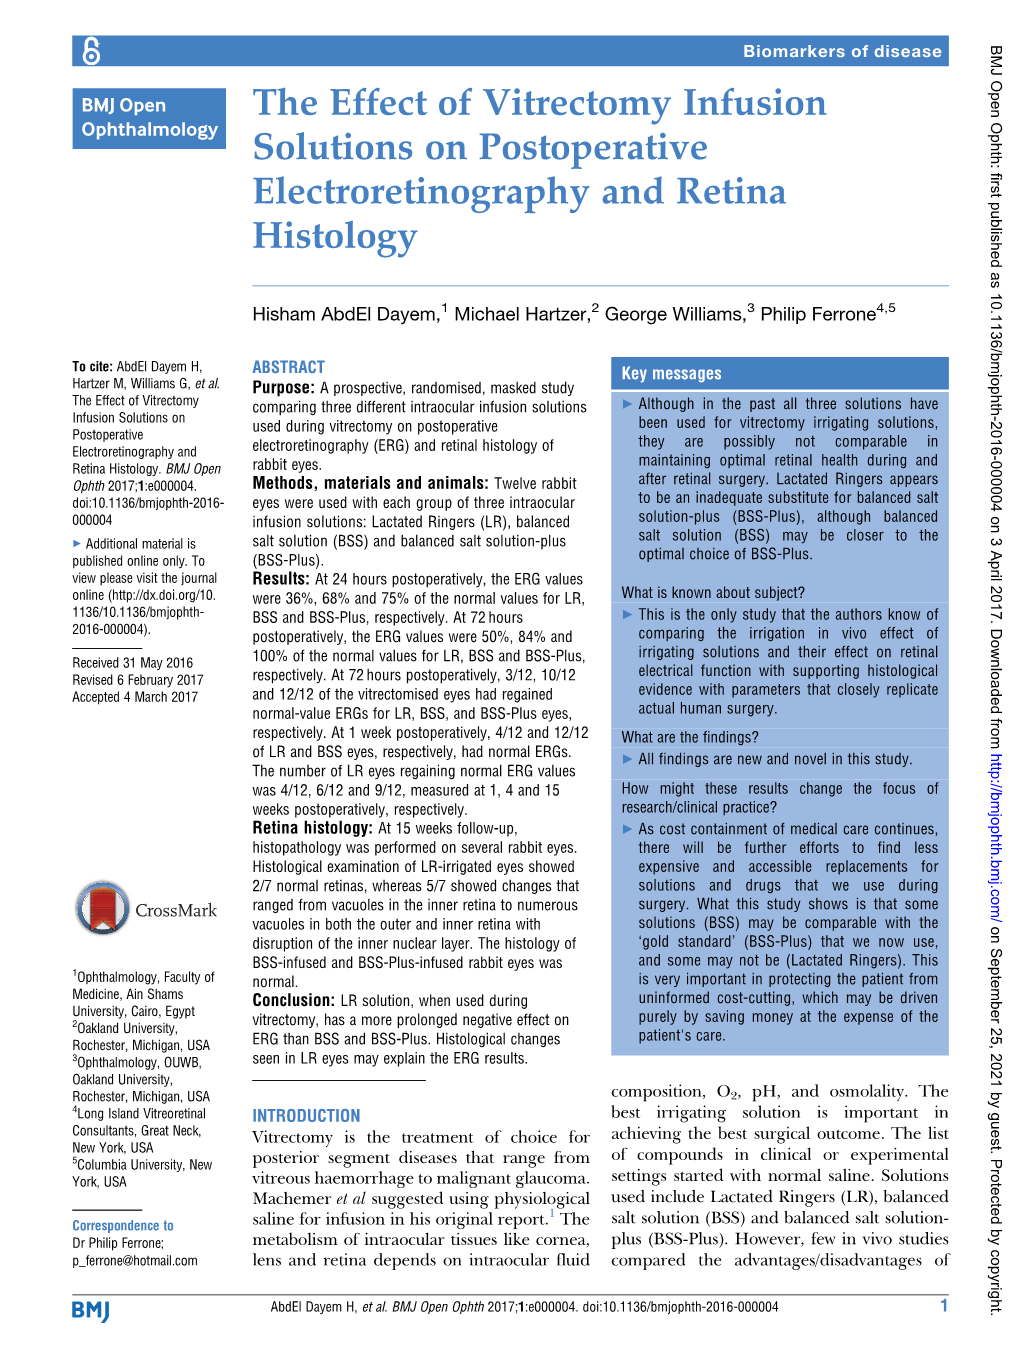 The Effect of Vitrectomy Infusion Solutions on Postoperative Electroretinography and Retina Histology